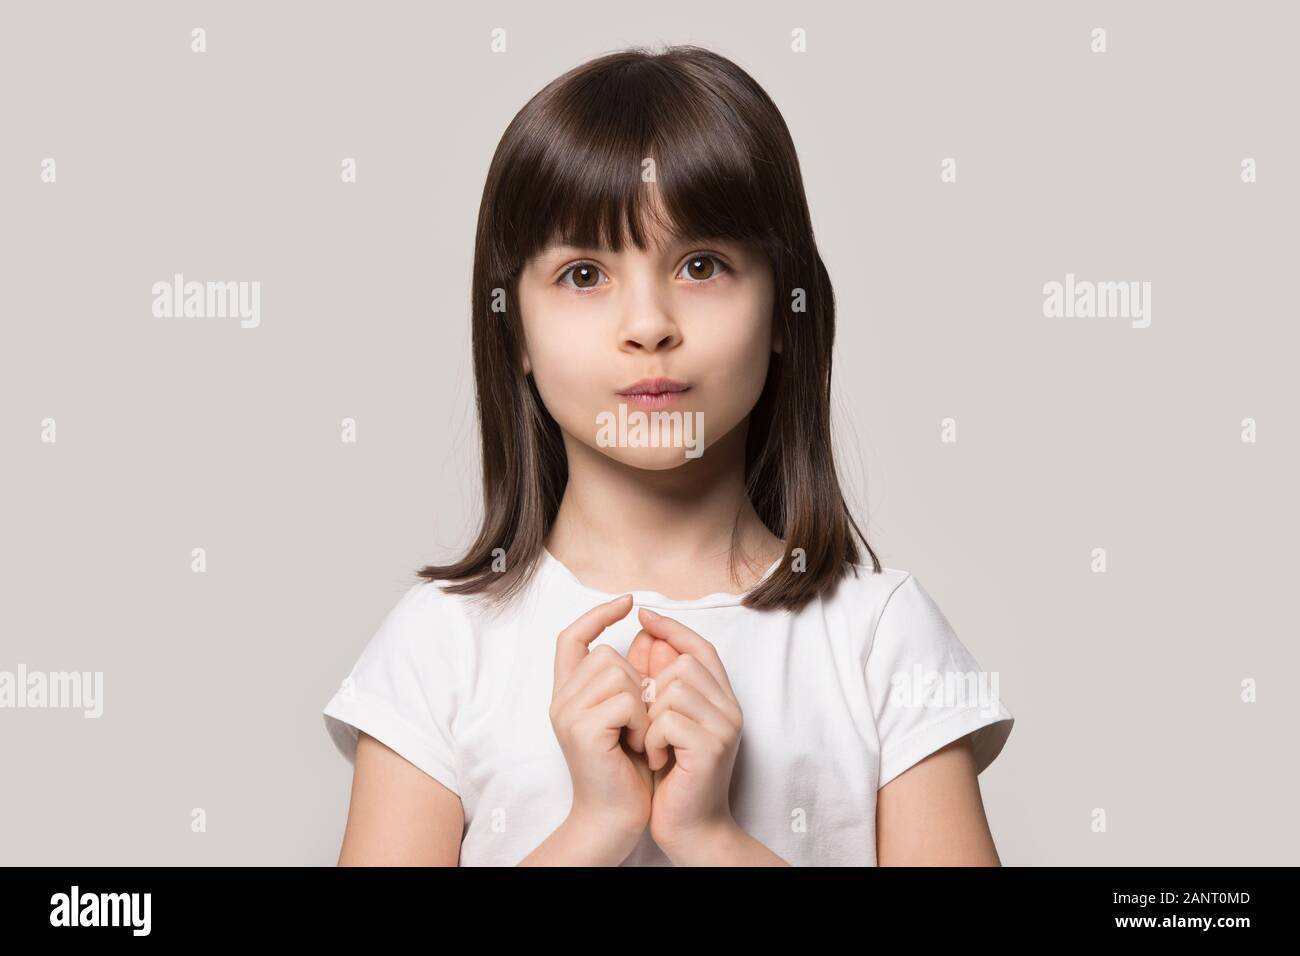 Adorable little curious girl hesitating asking questions. Stock Photo